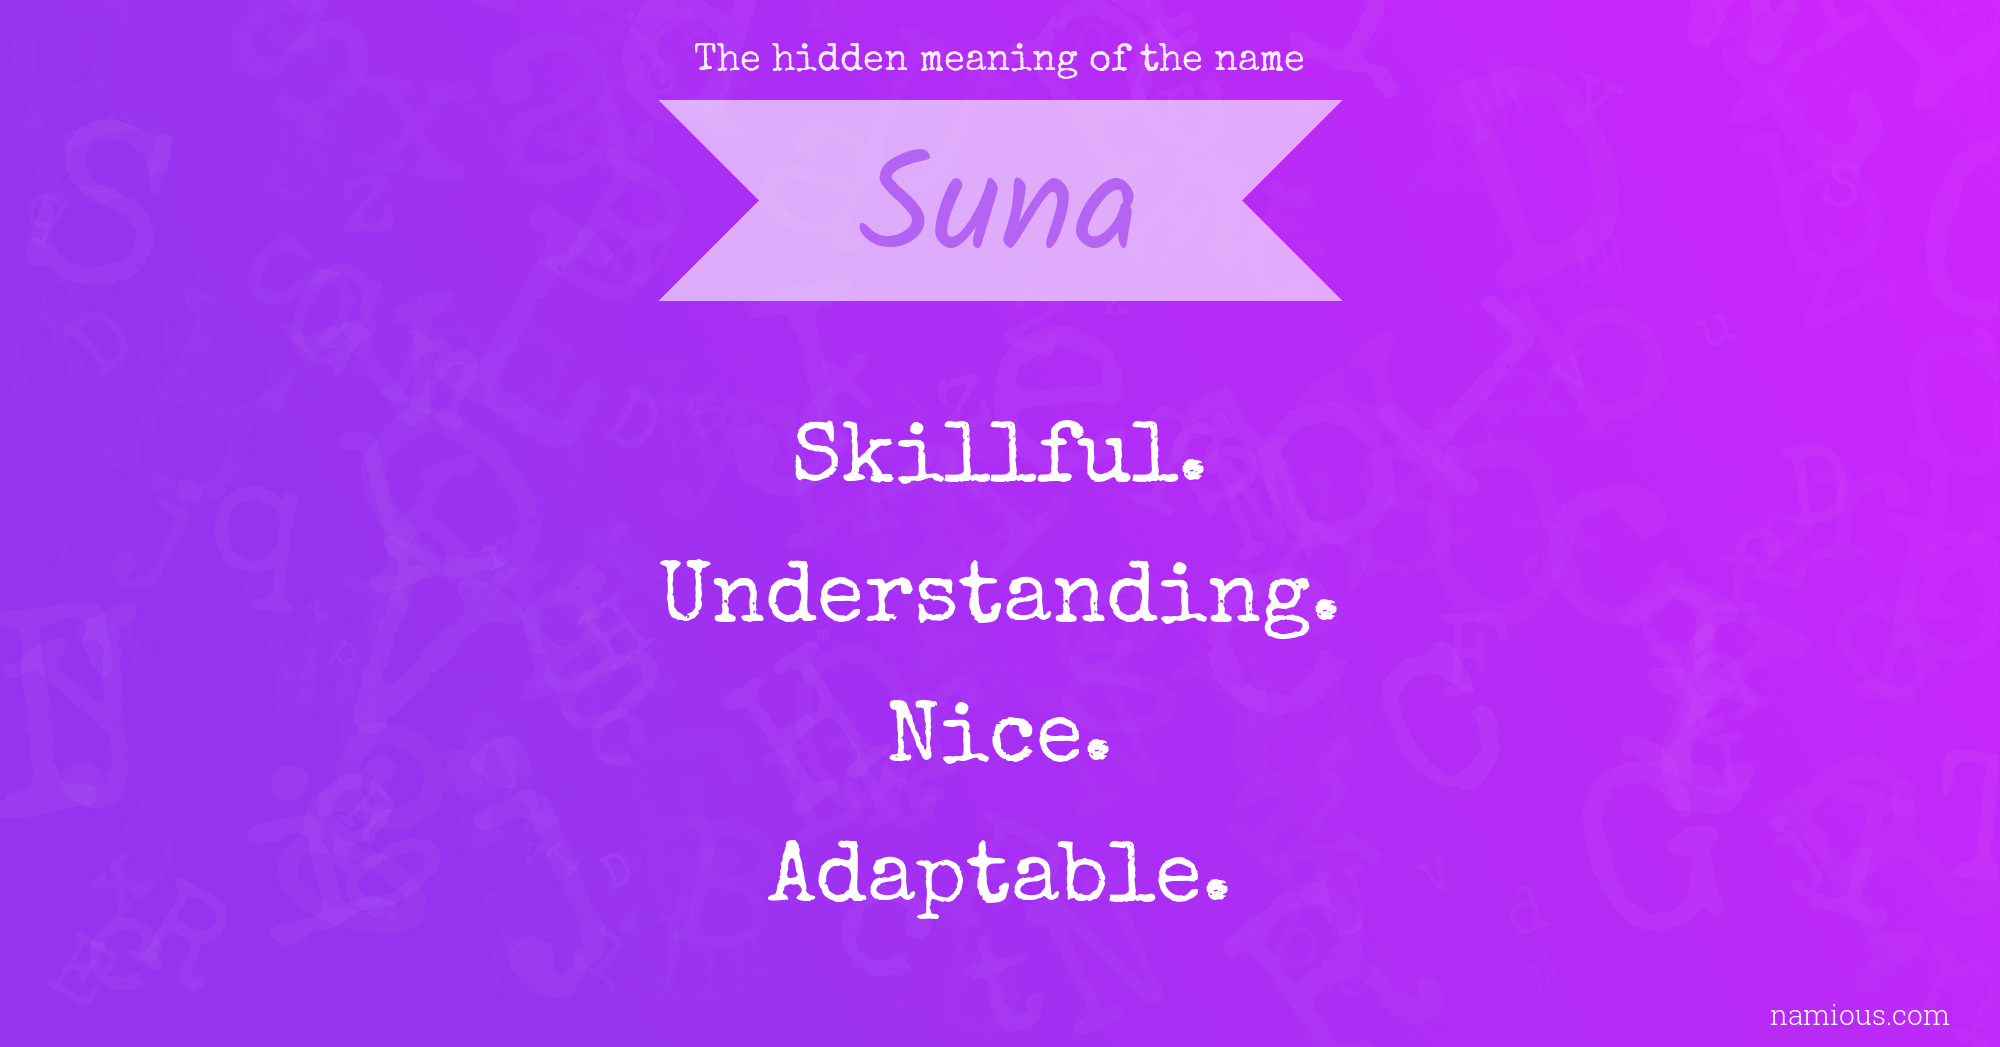 The hidden meaning of the name Suna